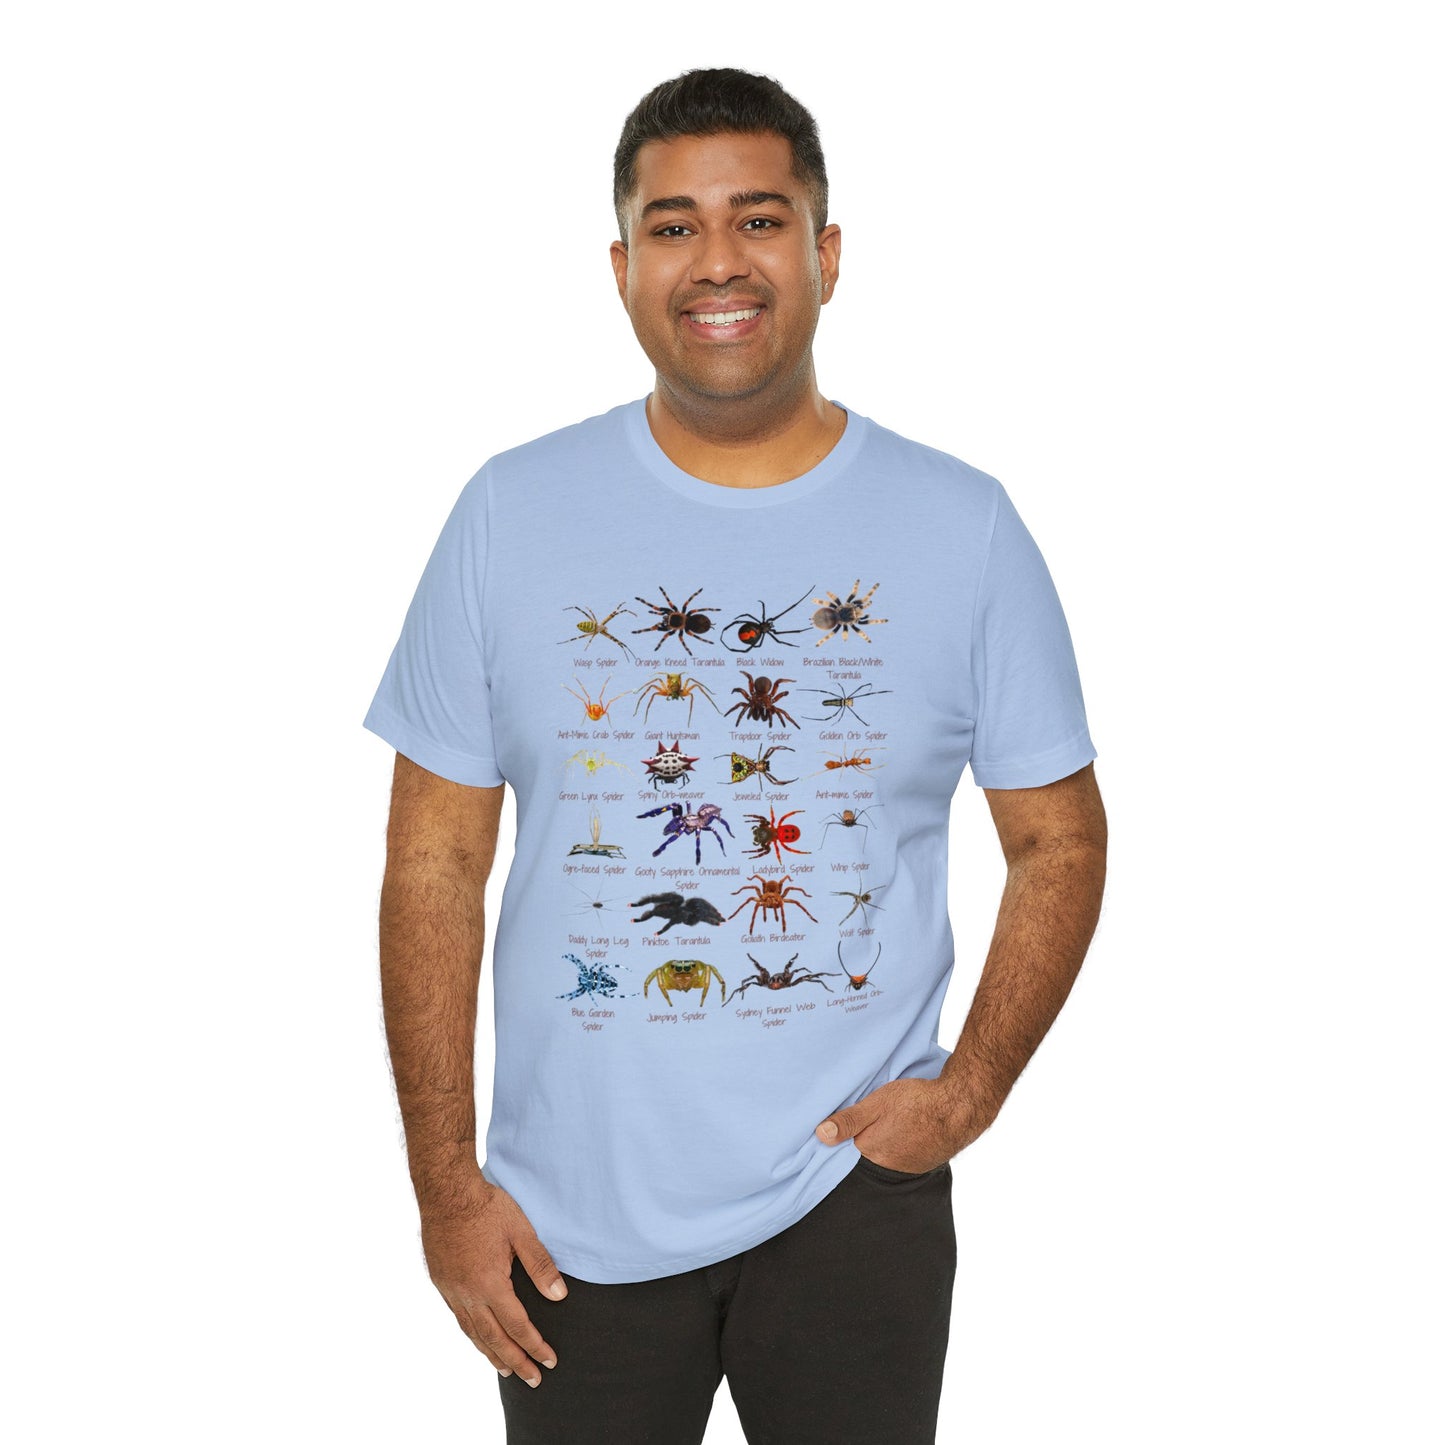 Stupendous Spiders T-shirt with 24 unique spiders